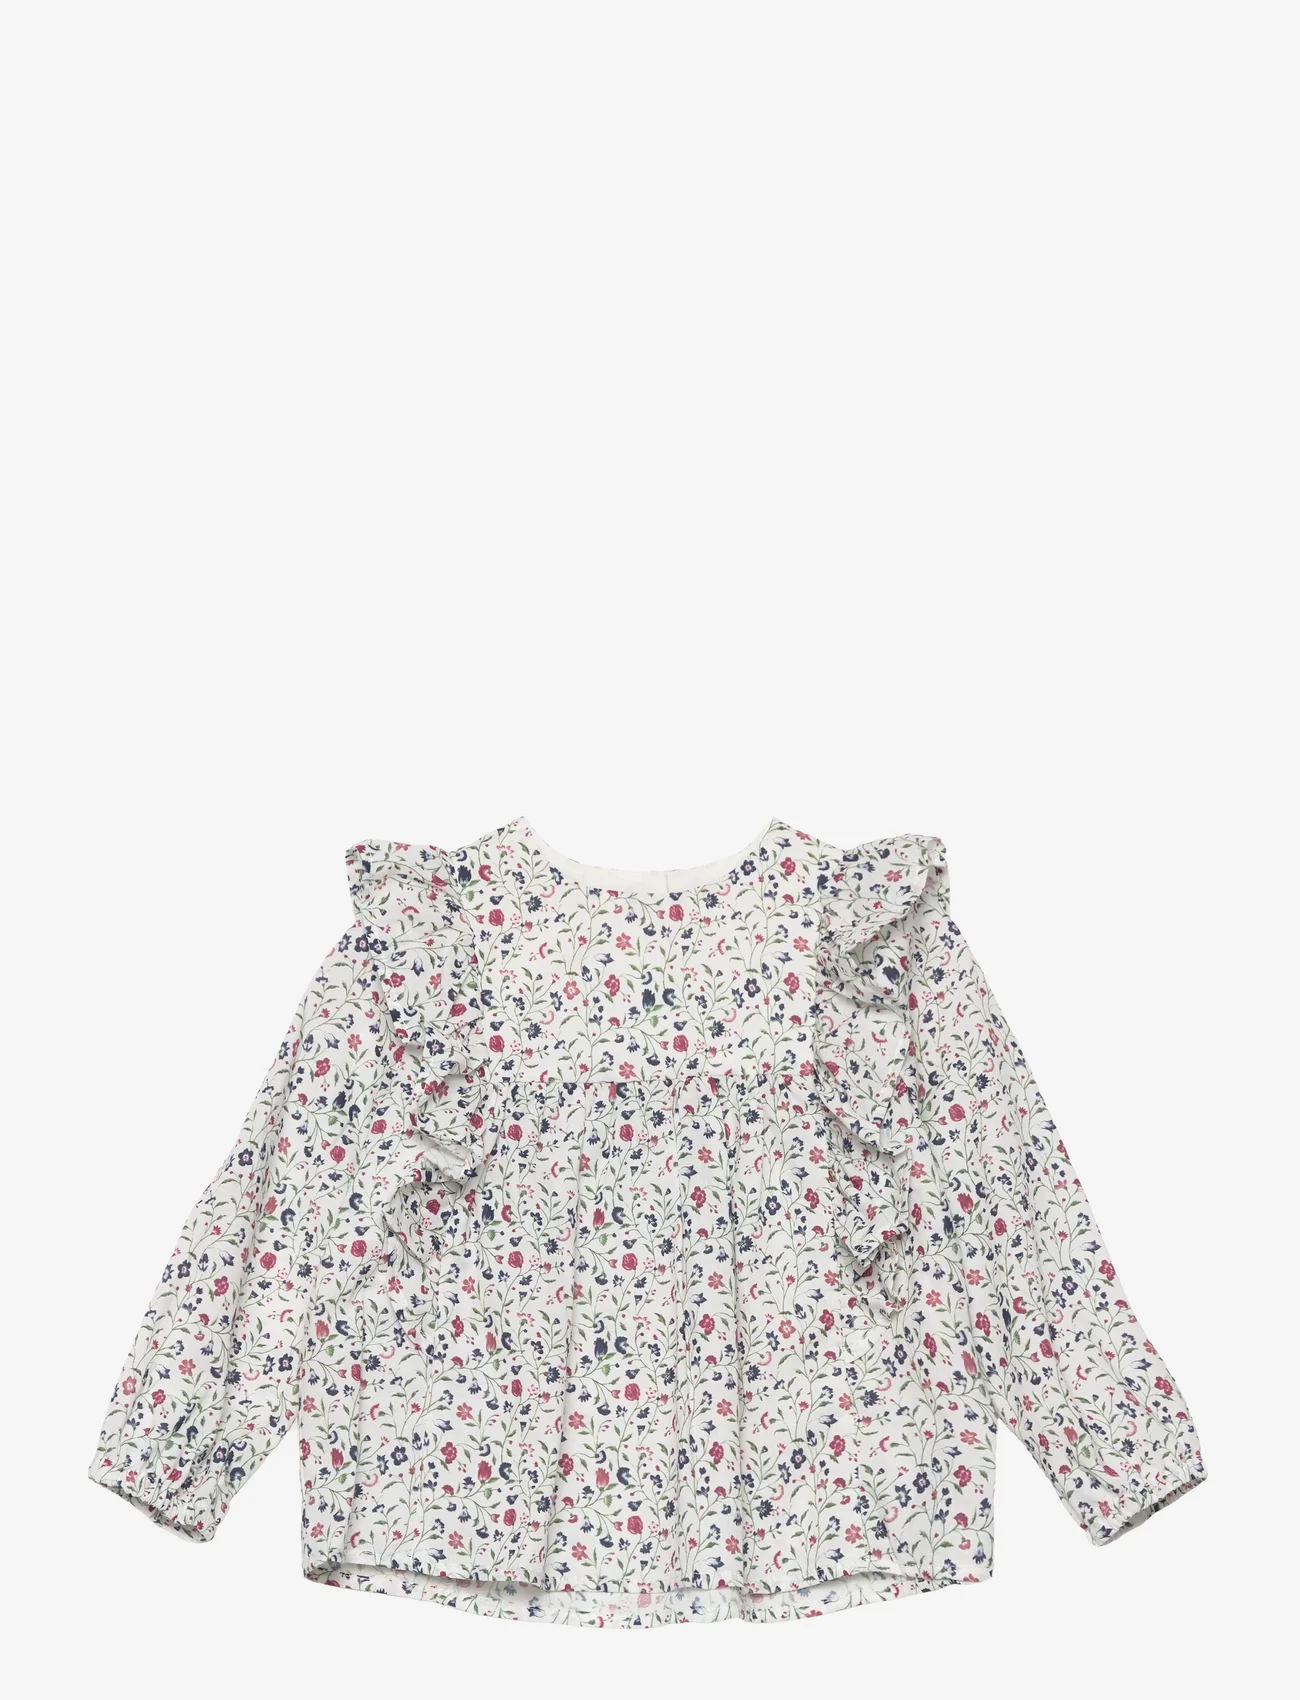 Mango - Ruffles printed blouse - sommarfynd - natural white - 0